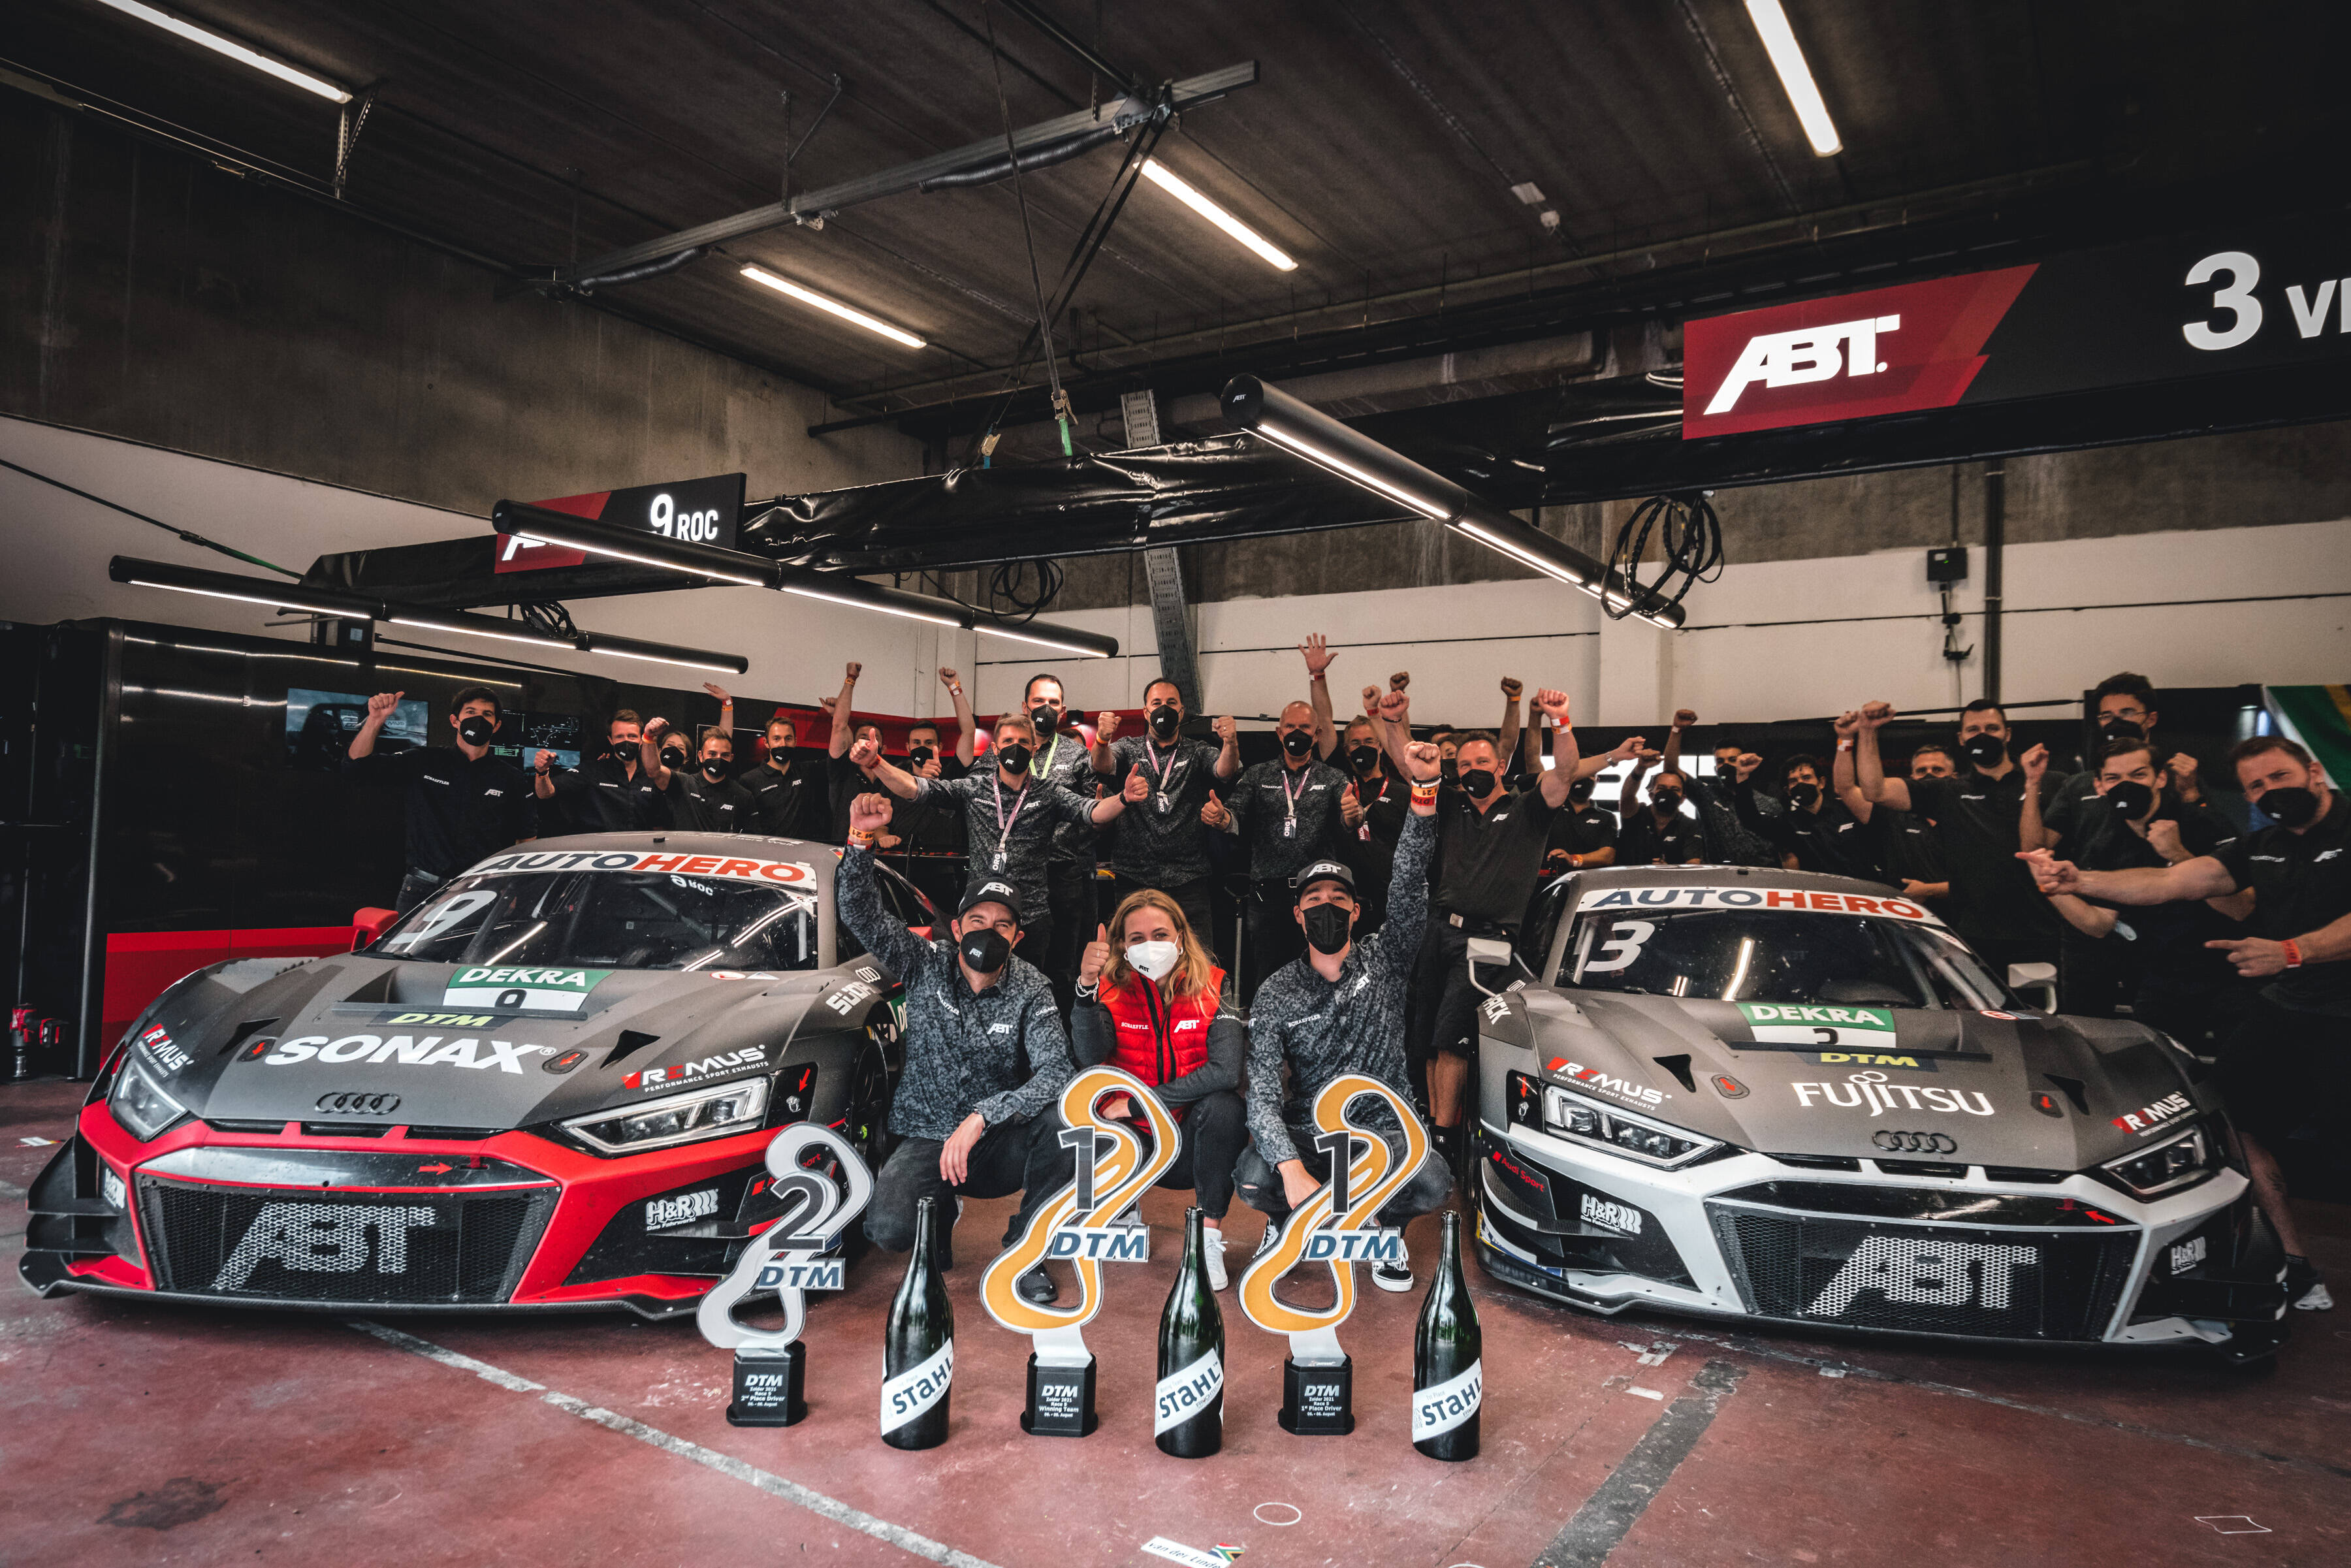 Team ABT Sportsline celebrates 1-2 victory at Zolder - Audi Tuning